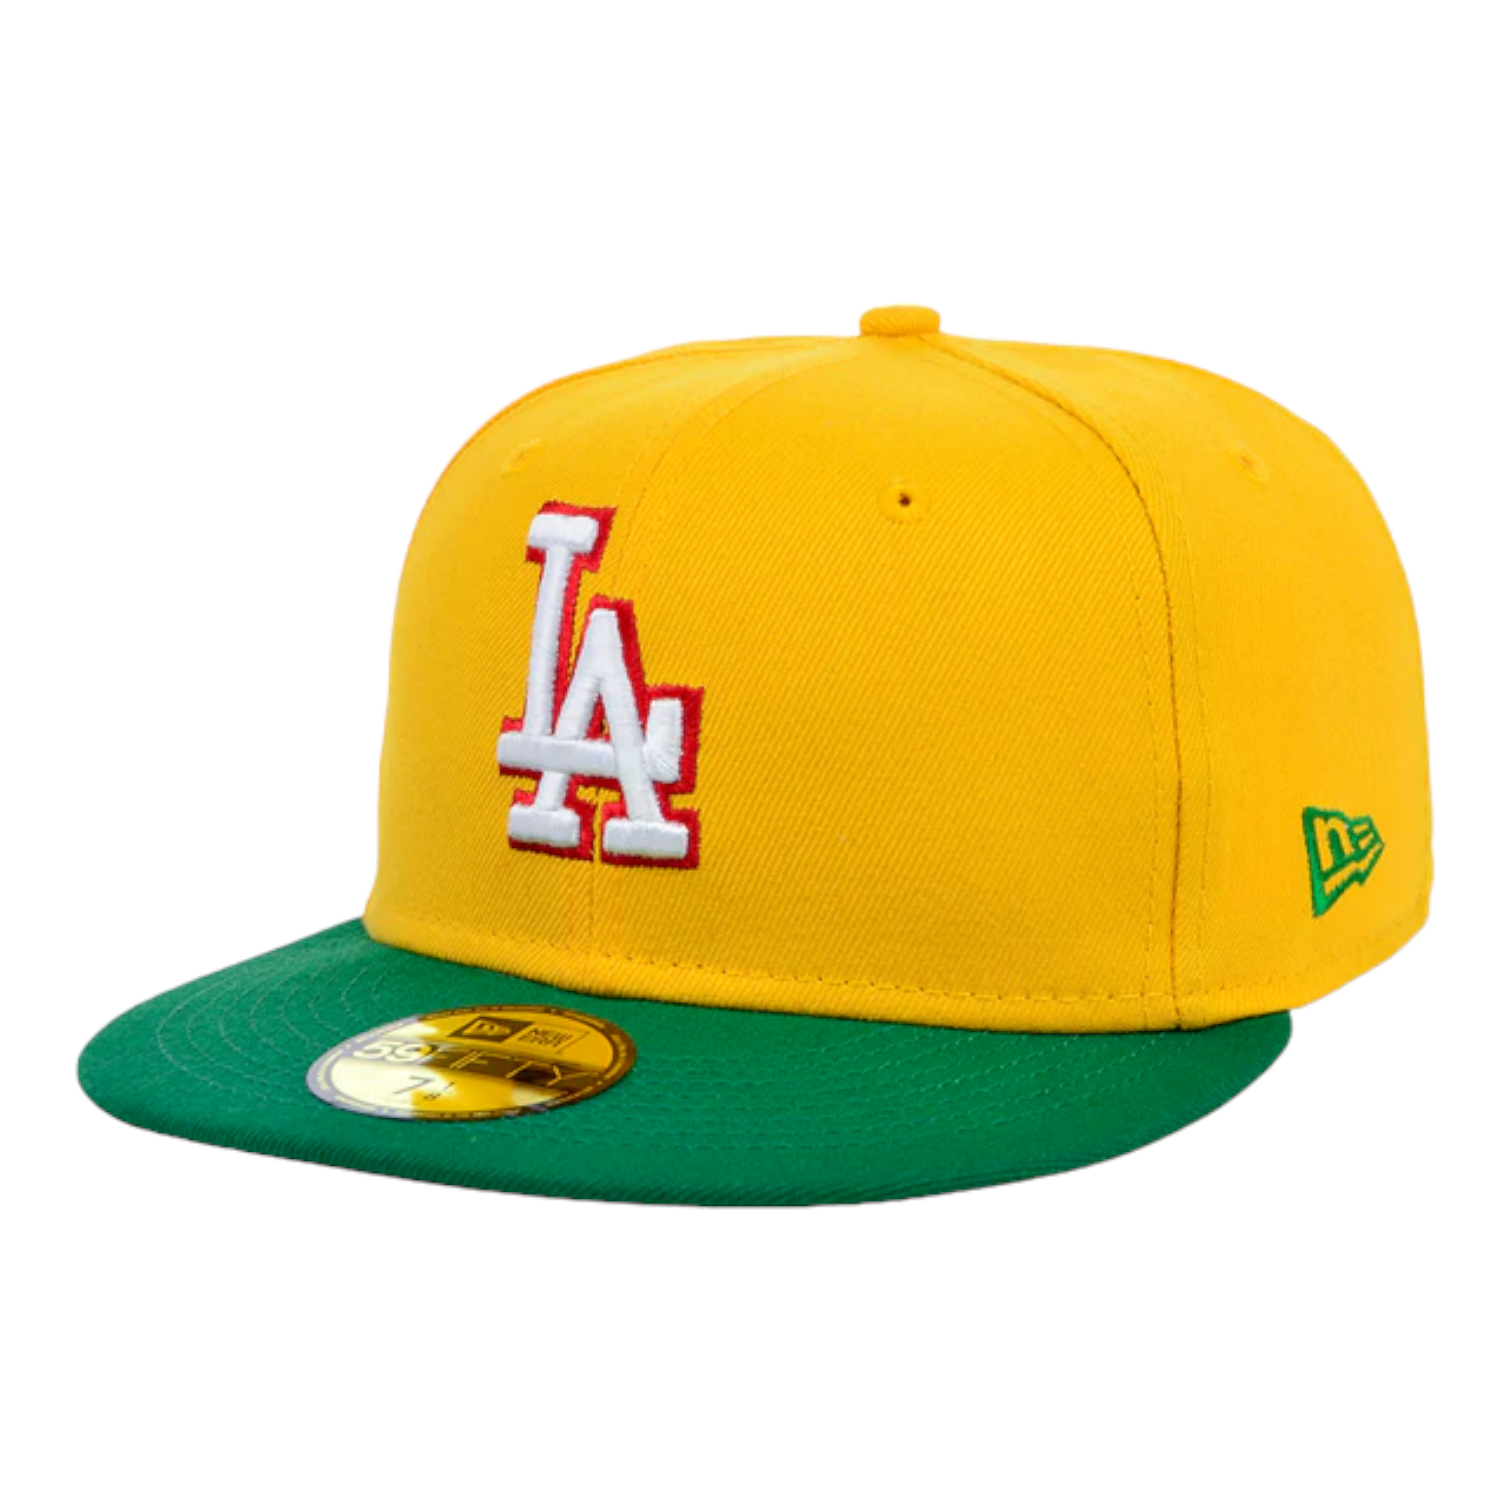 Los angeles dodgers crayola school supplies fifty fitted hat